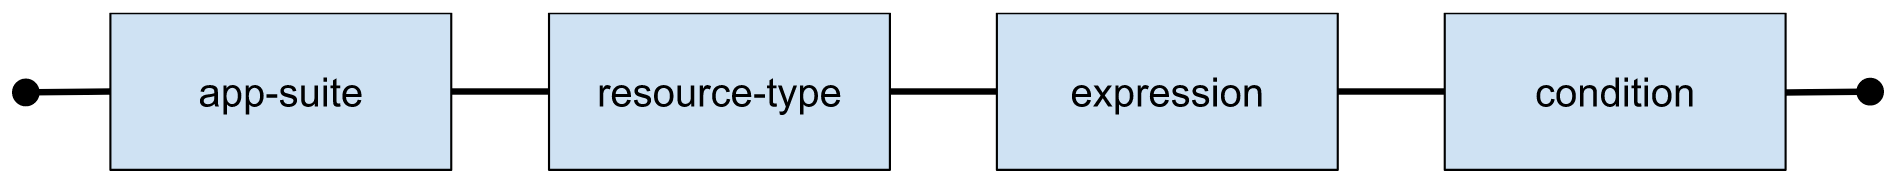 NGL-Syntax-Diagram.png